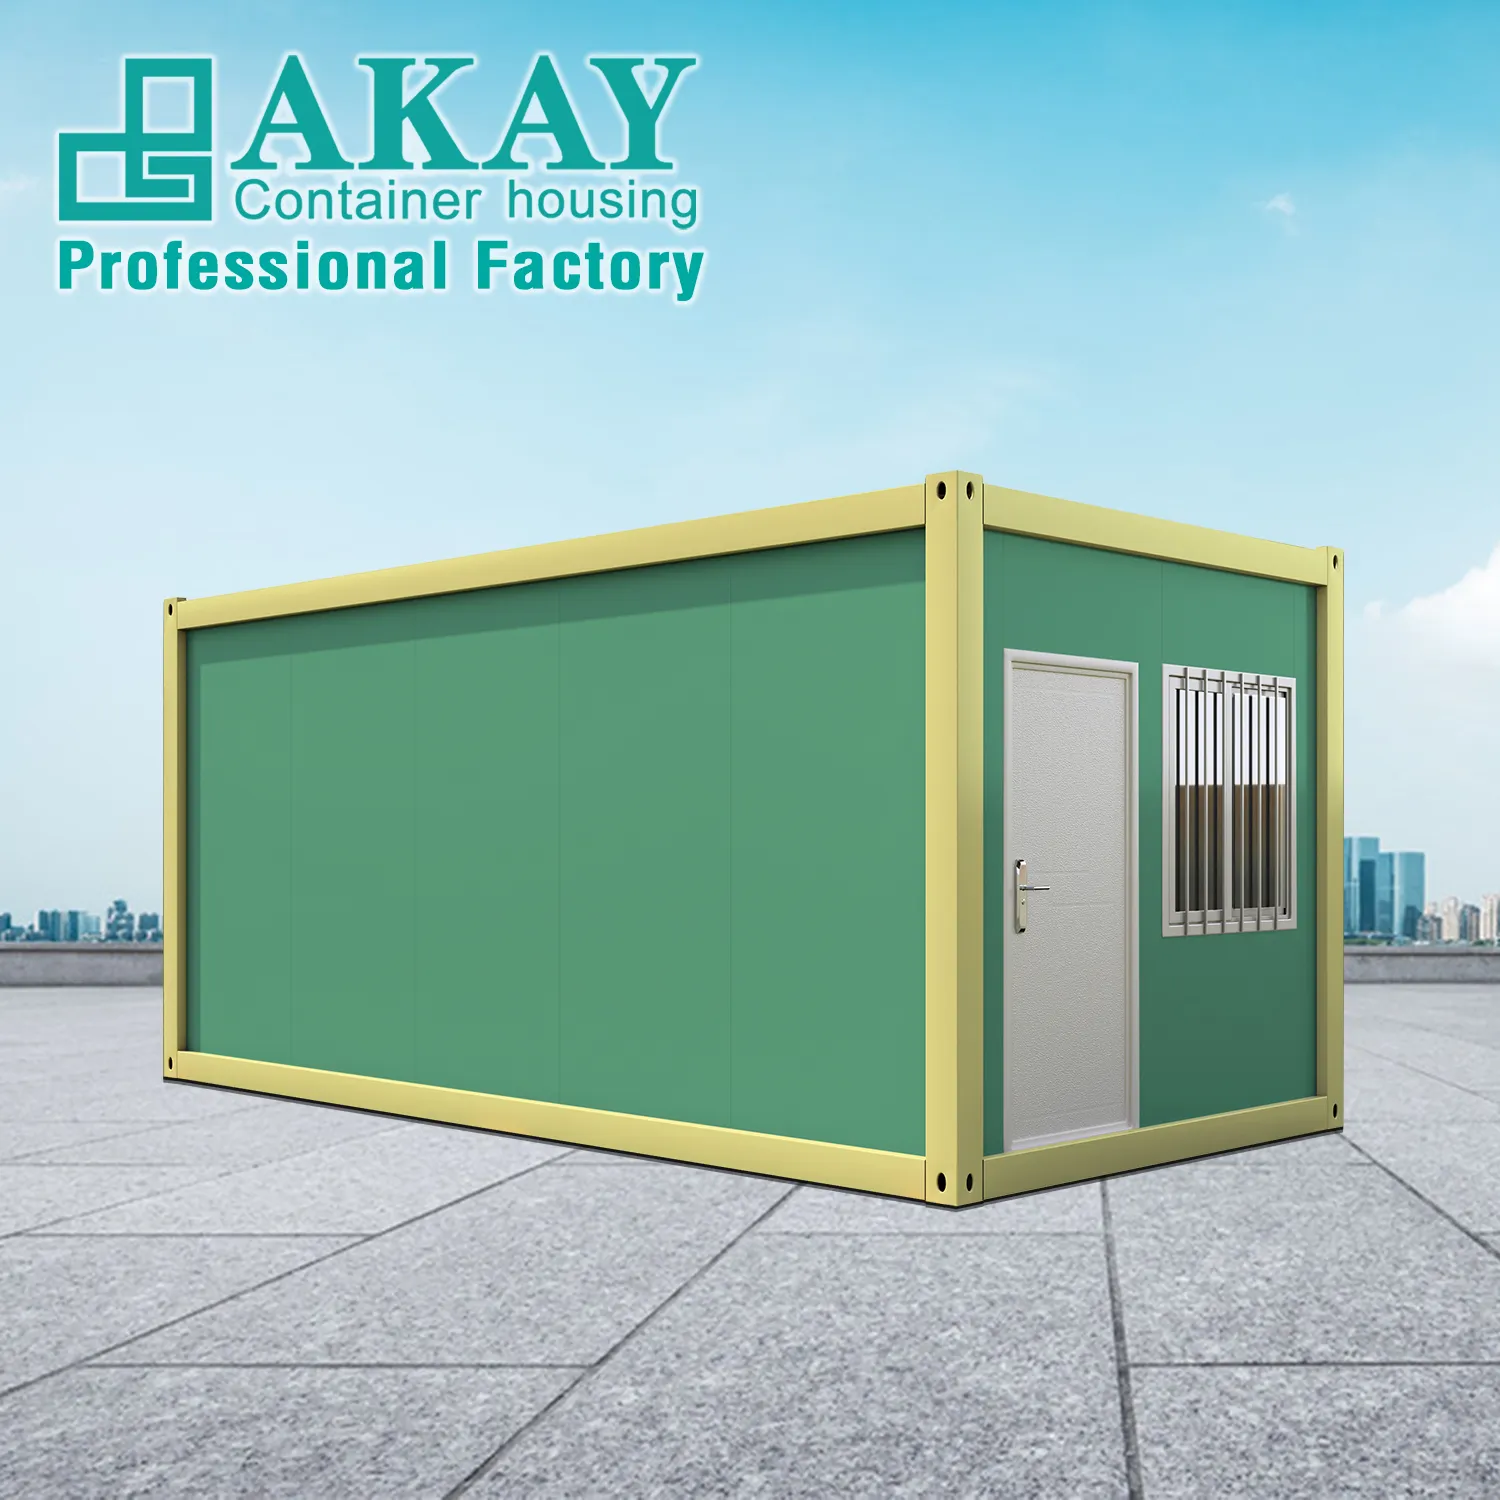 Easy Assemble Design Cheap Price Wholesale Modern Container Prefab China Tiny Homes Mini Cheap Tiny Houses Prefabricated